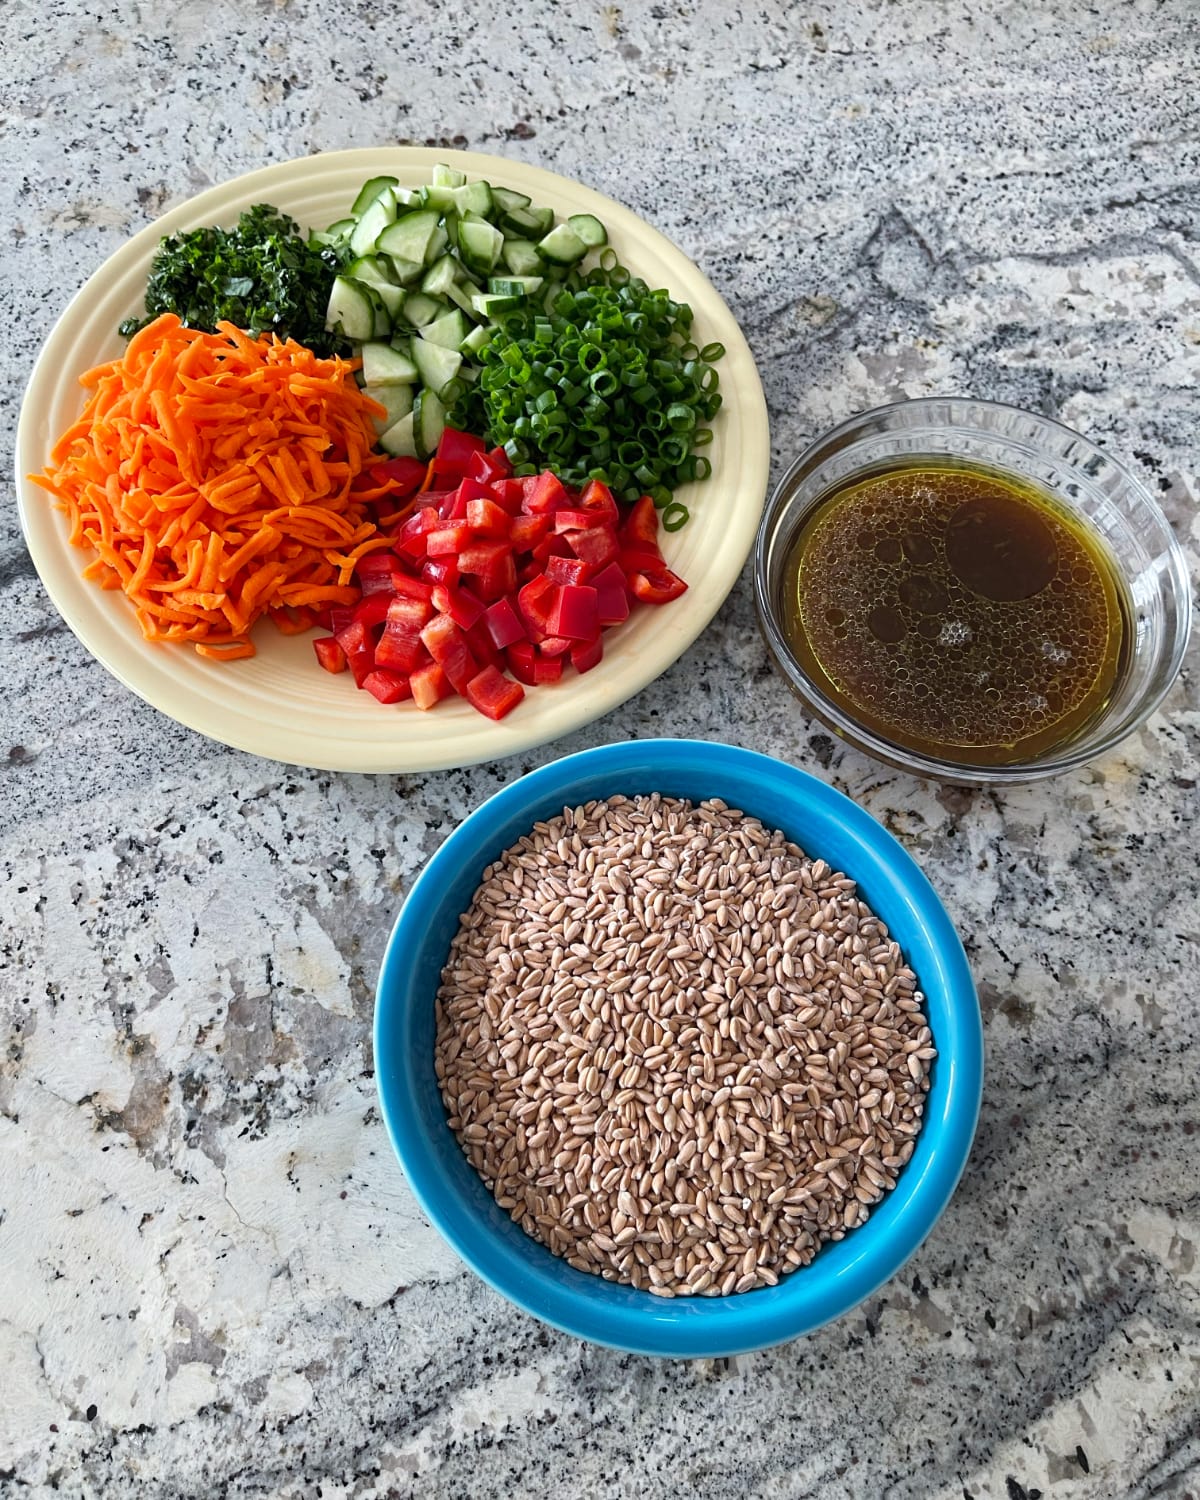 Ingredients including farro, shredded carrots, chopped red bell pepper, cucumber, sliced green onions, chopped cilantro, olive oil and lime juice dressing.